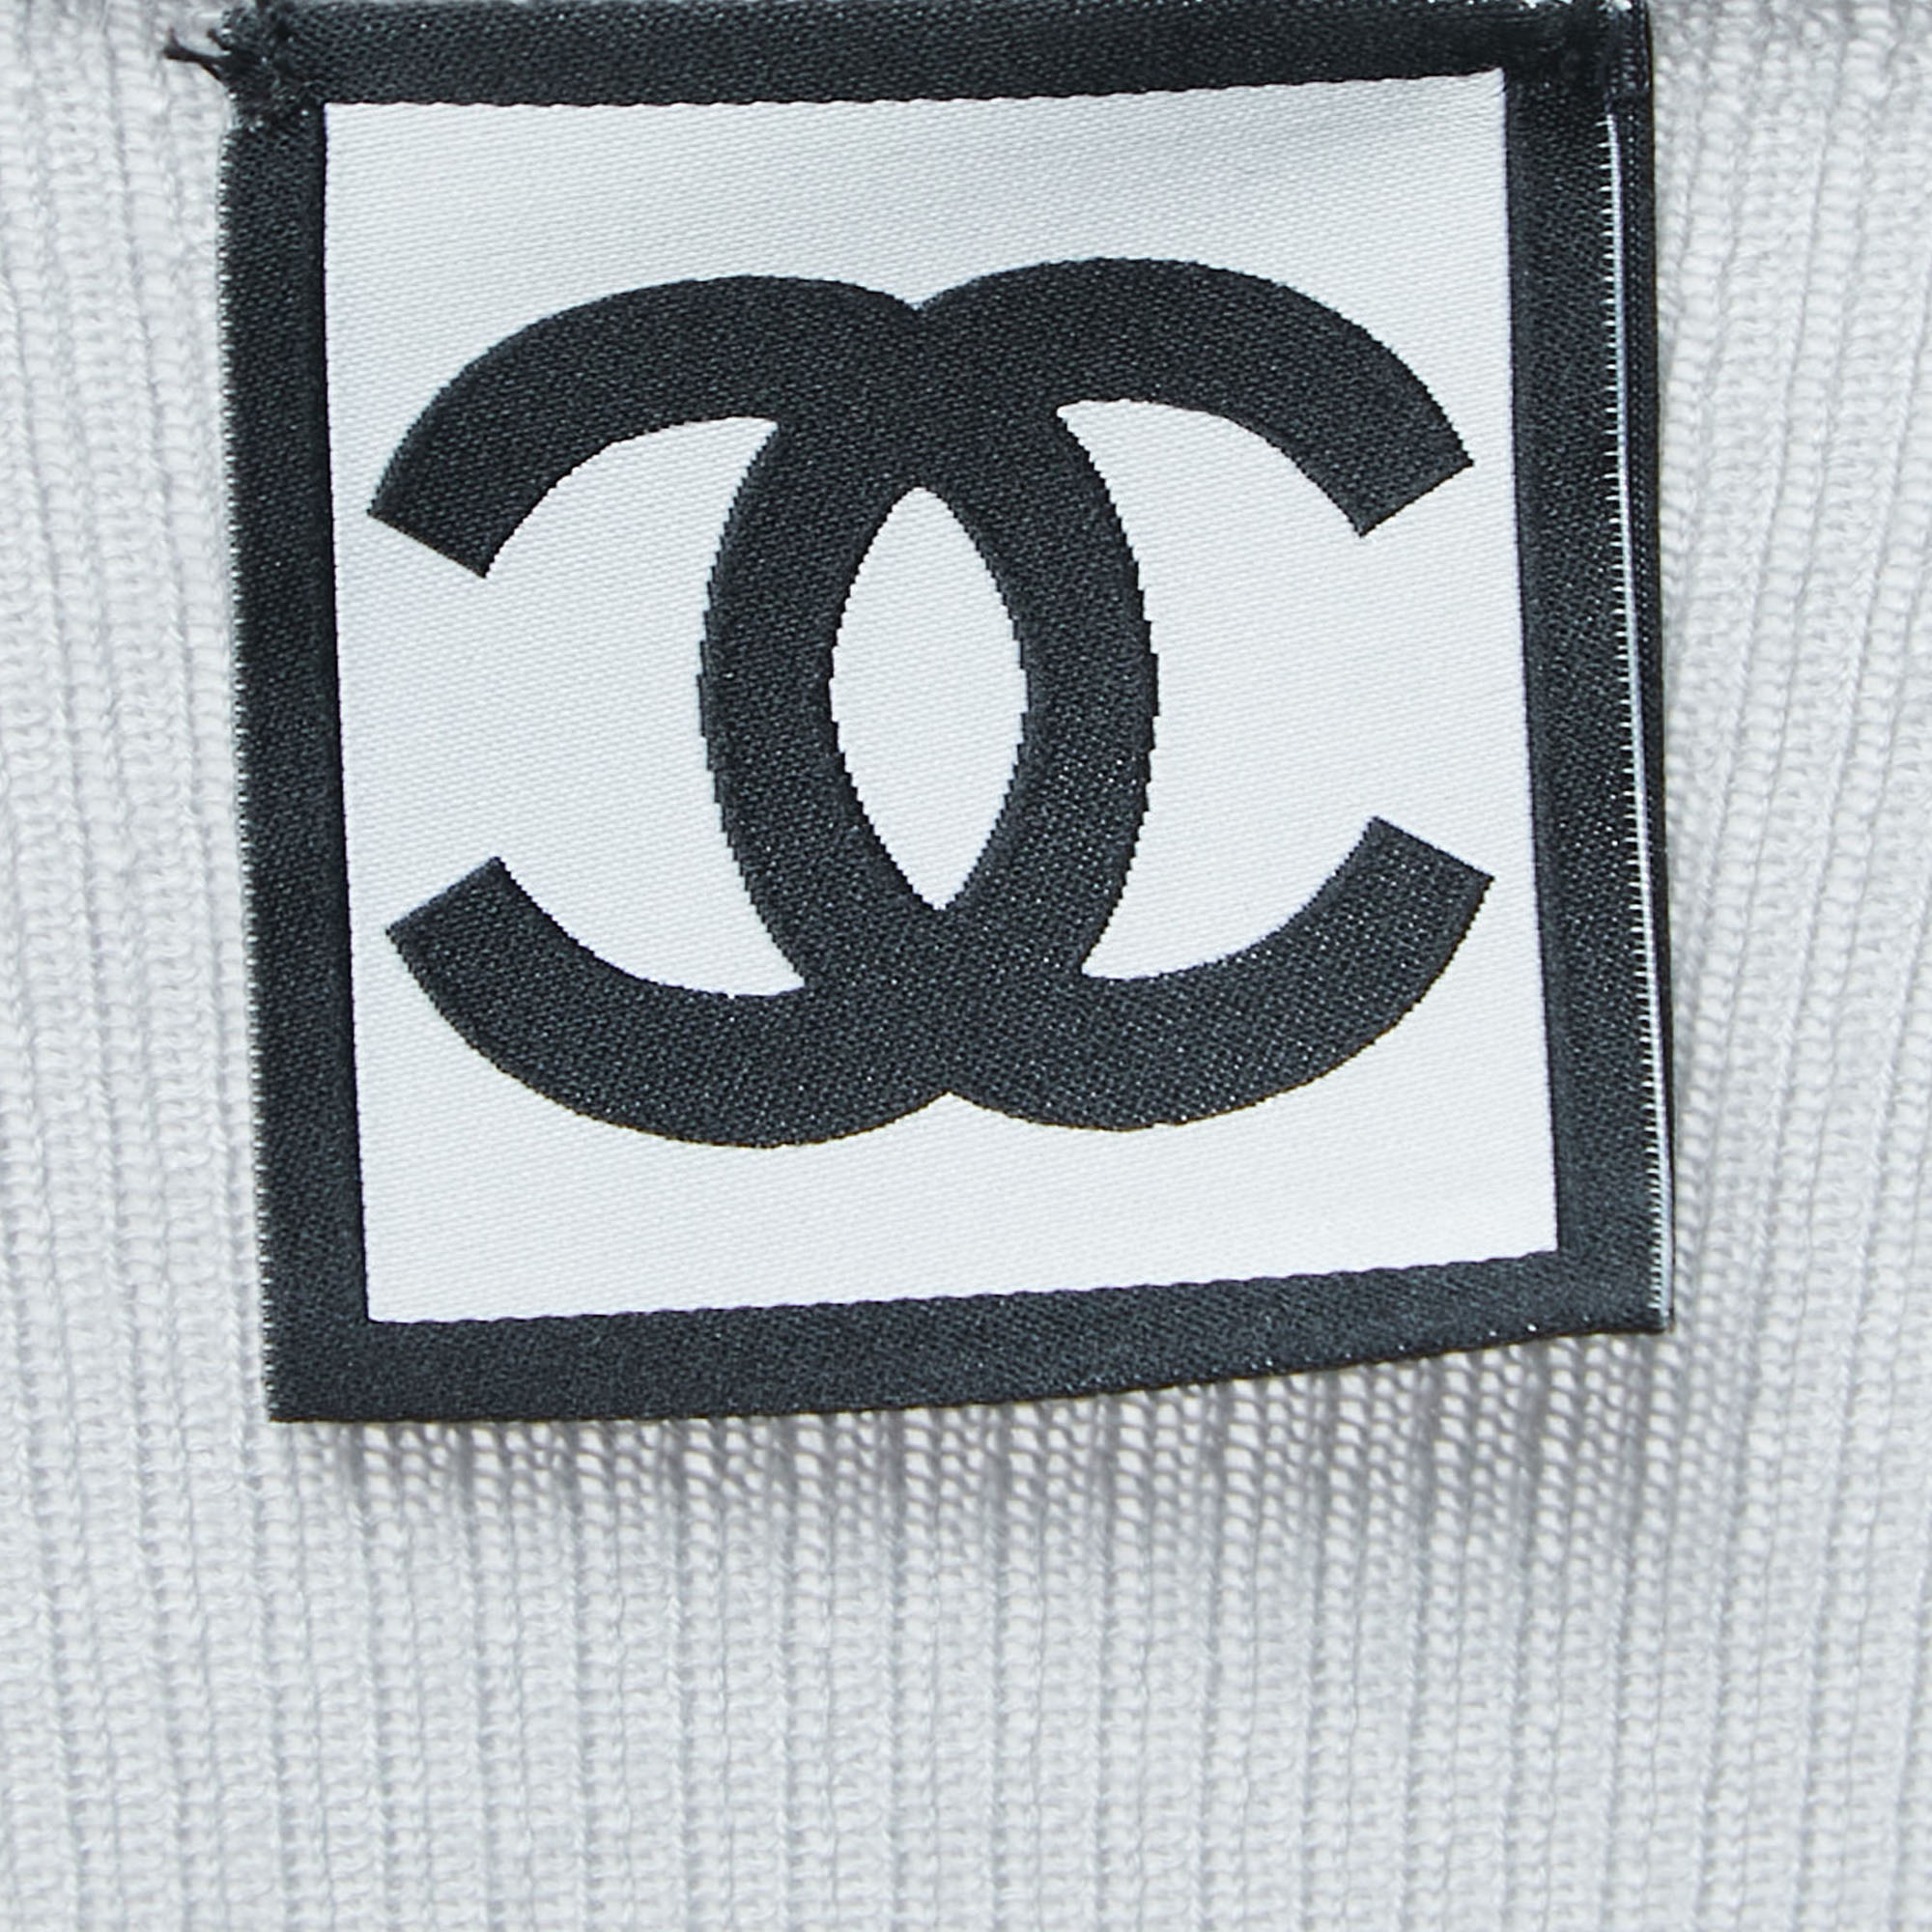 Chanel Sports Grey Cashmere Knit Long Sleeve Top XS